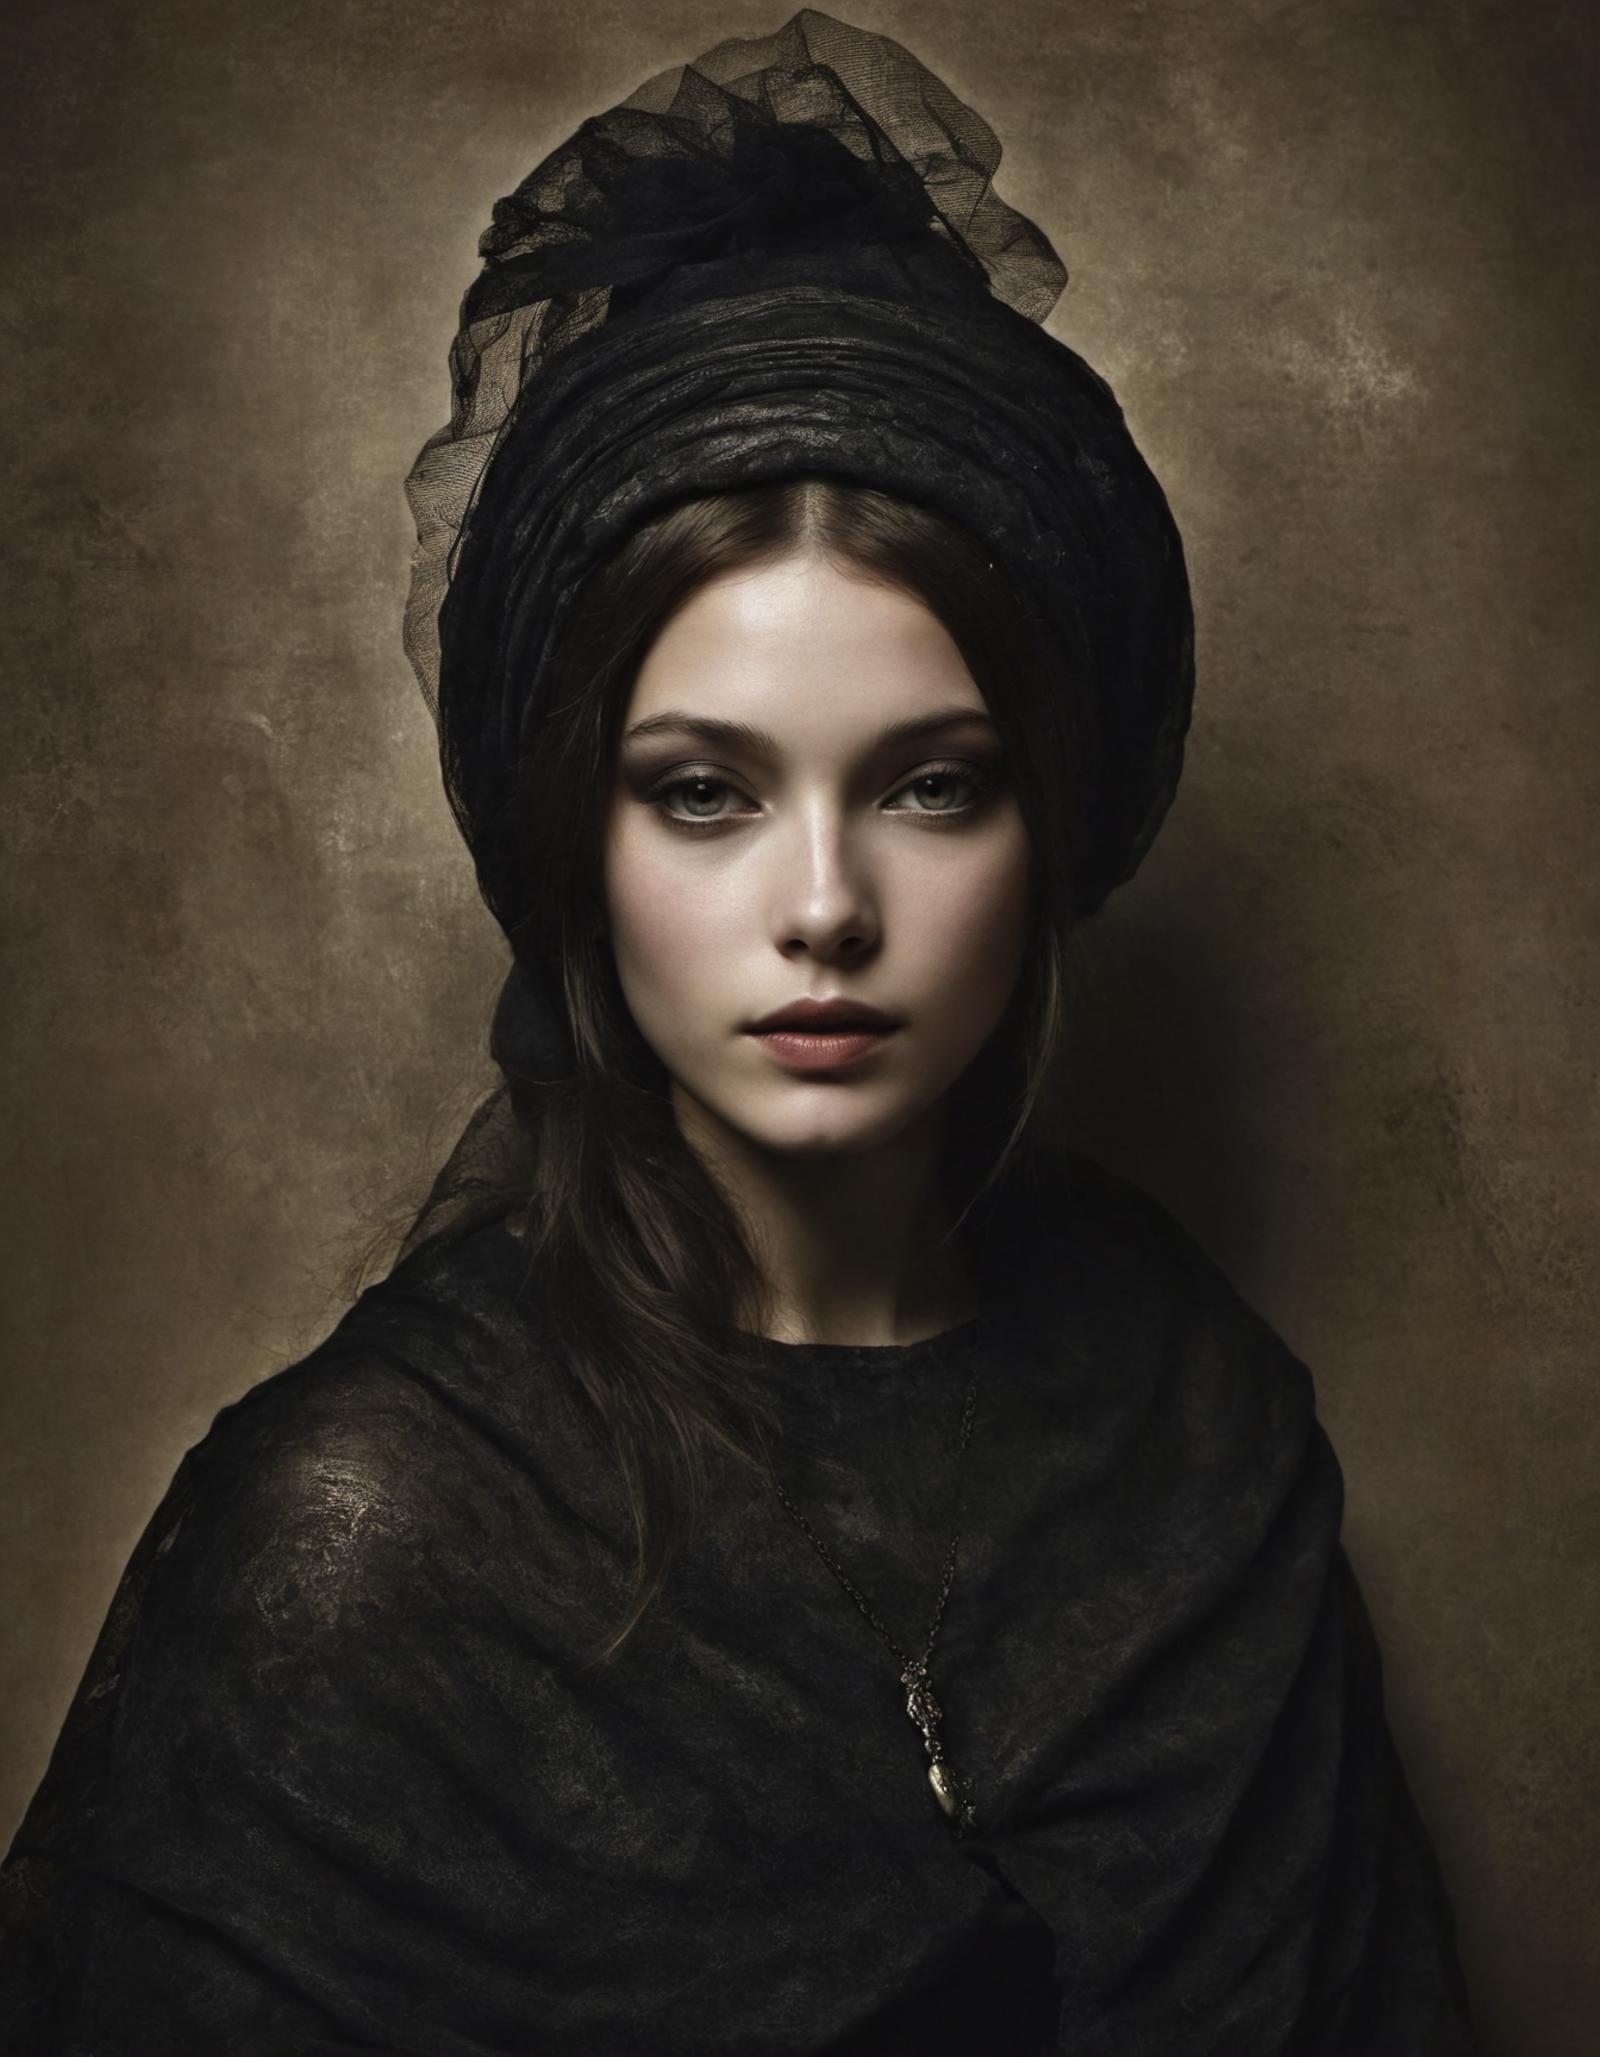 A beautiful young woman wearing a black shawl and a black lace headpiece.